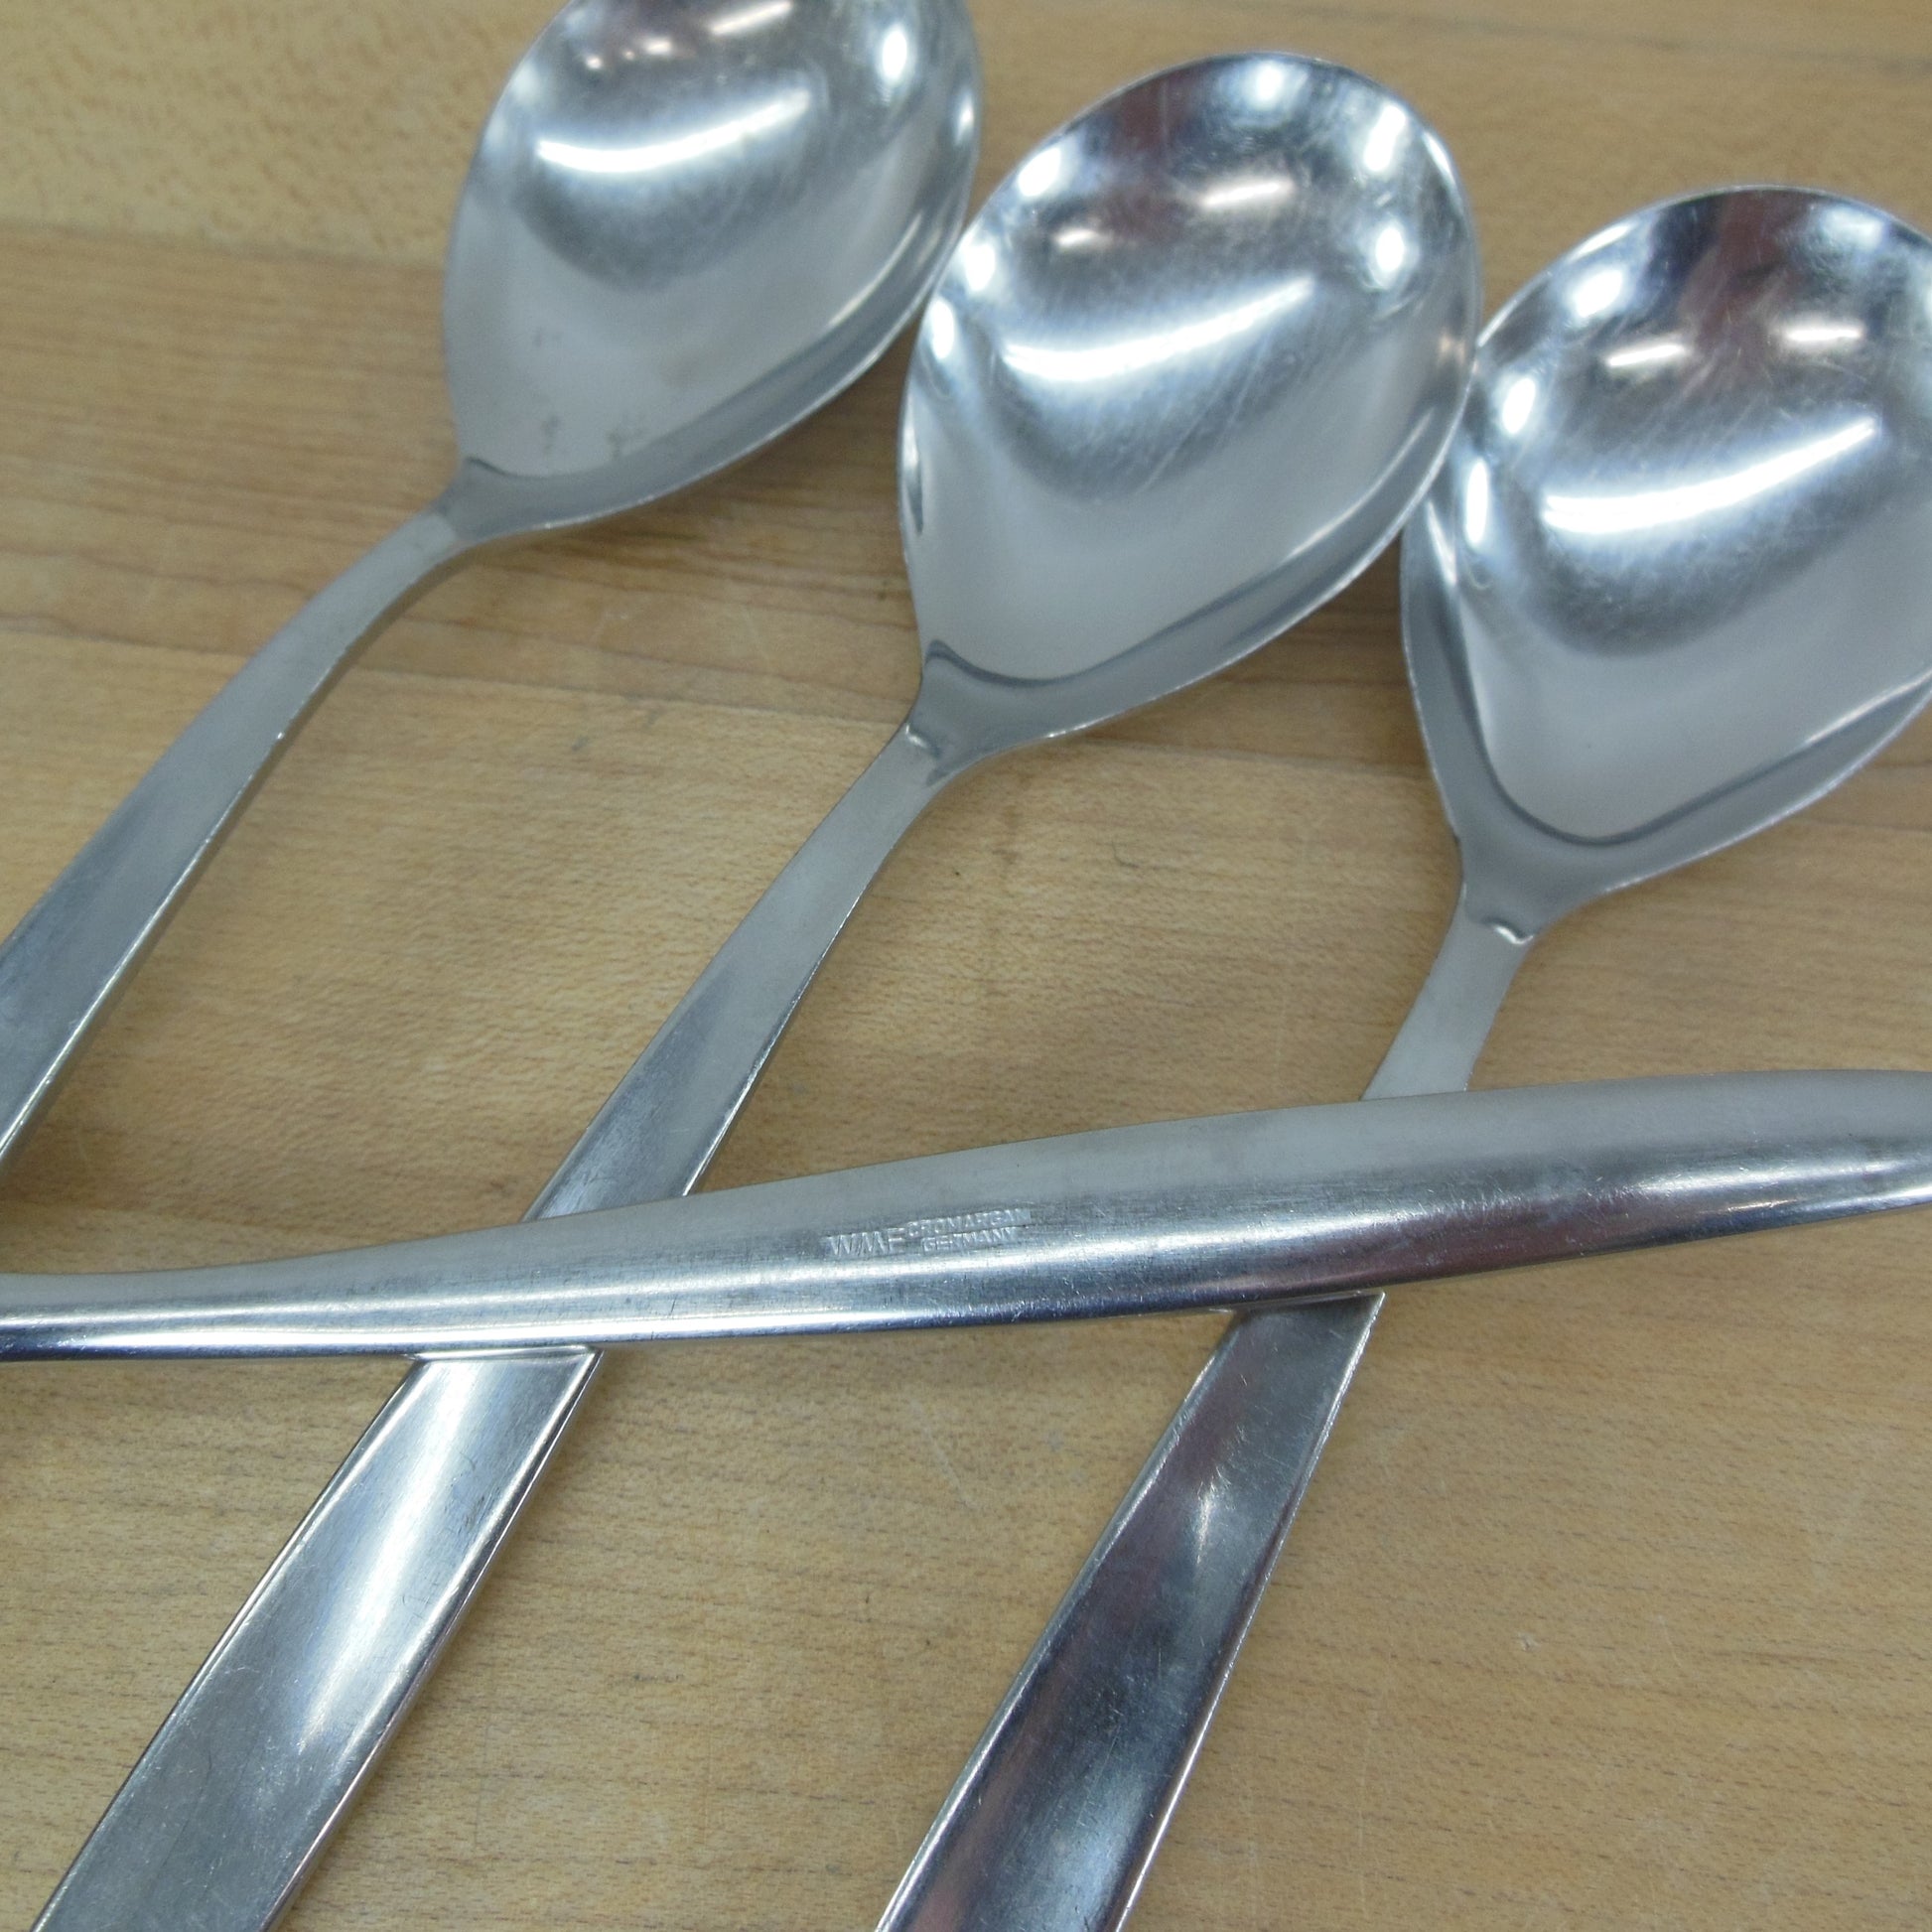 WMF Cromargan Germany Older Laurel Stainless Place/Soup Spoon - 4 Set used